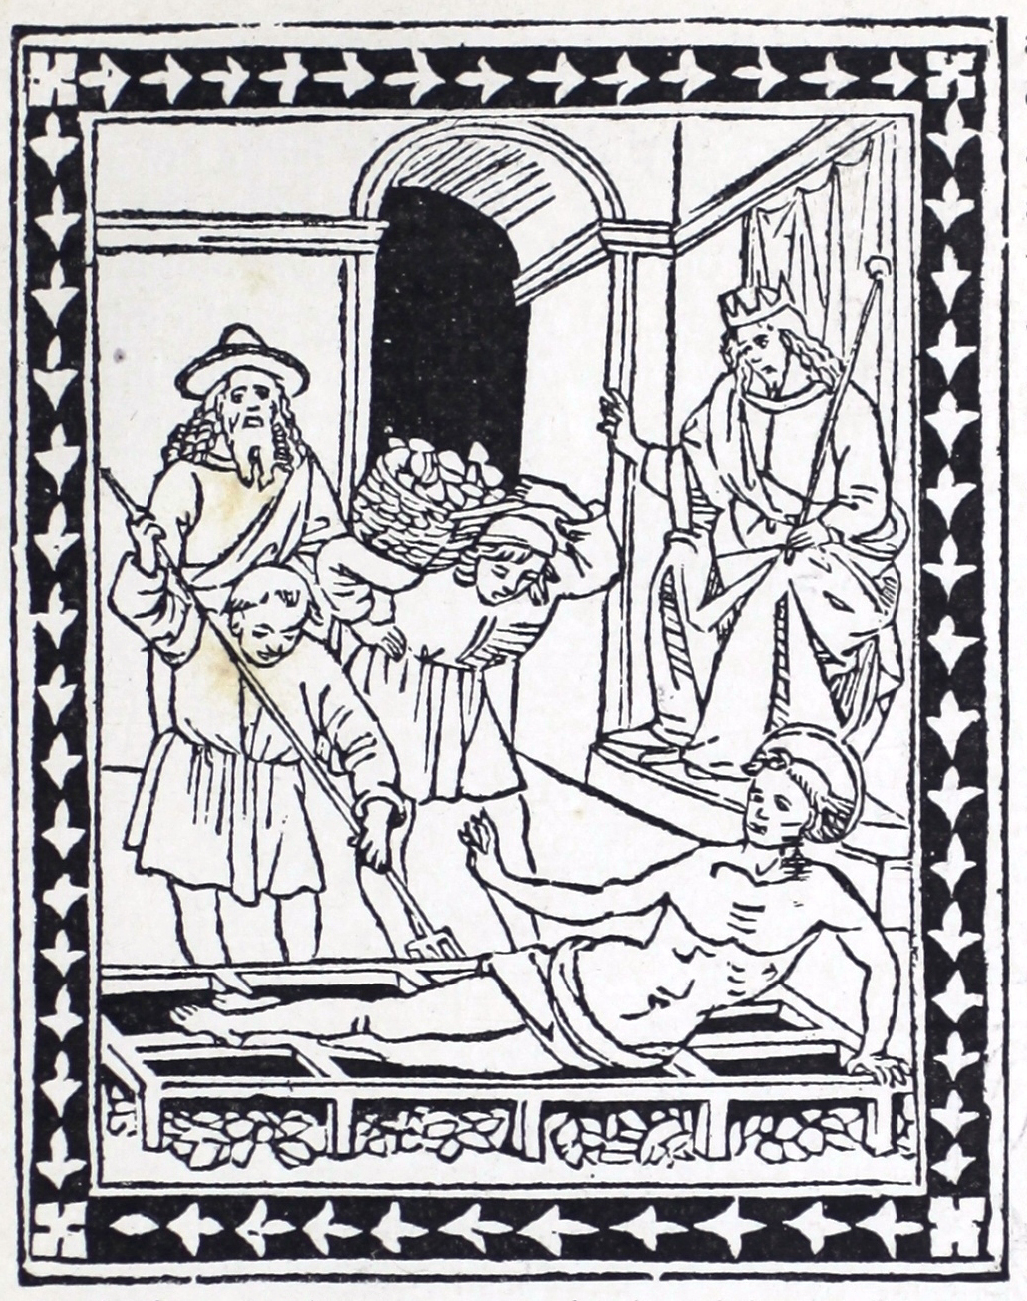 Wood engraved image shows five men in an enclosed space. The three men on the left are looking downward at a disrobed man lying on a crate with his right hand held upward. There is another man behind him, also looking downward, with a crown and a staff. 